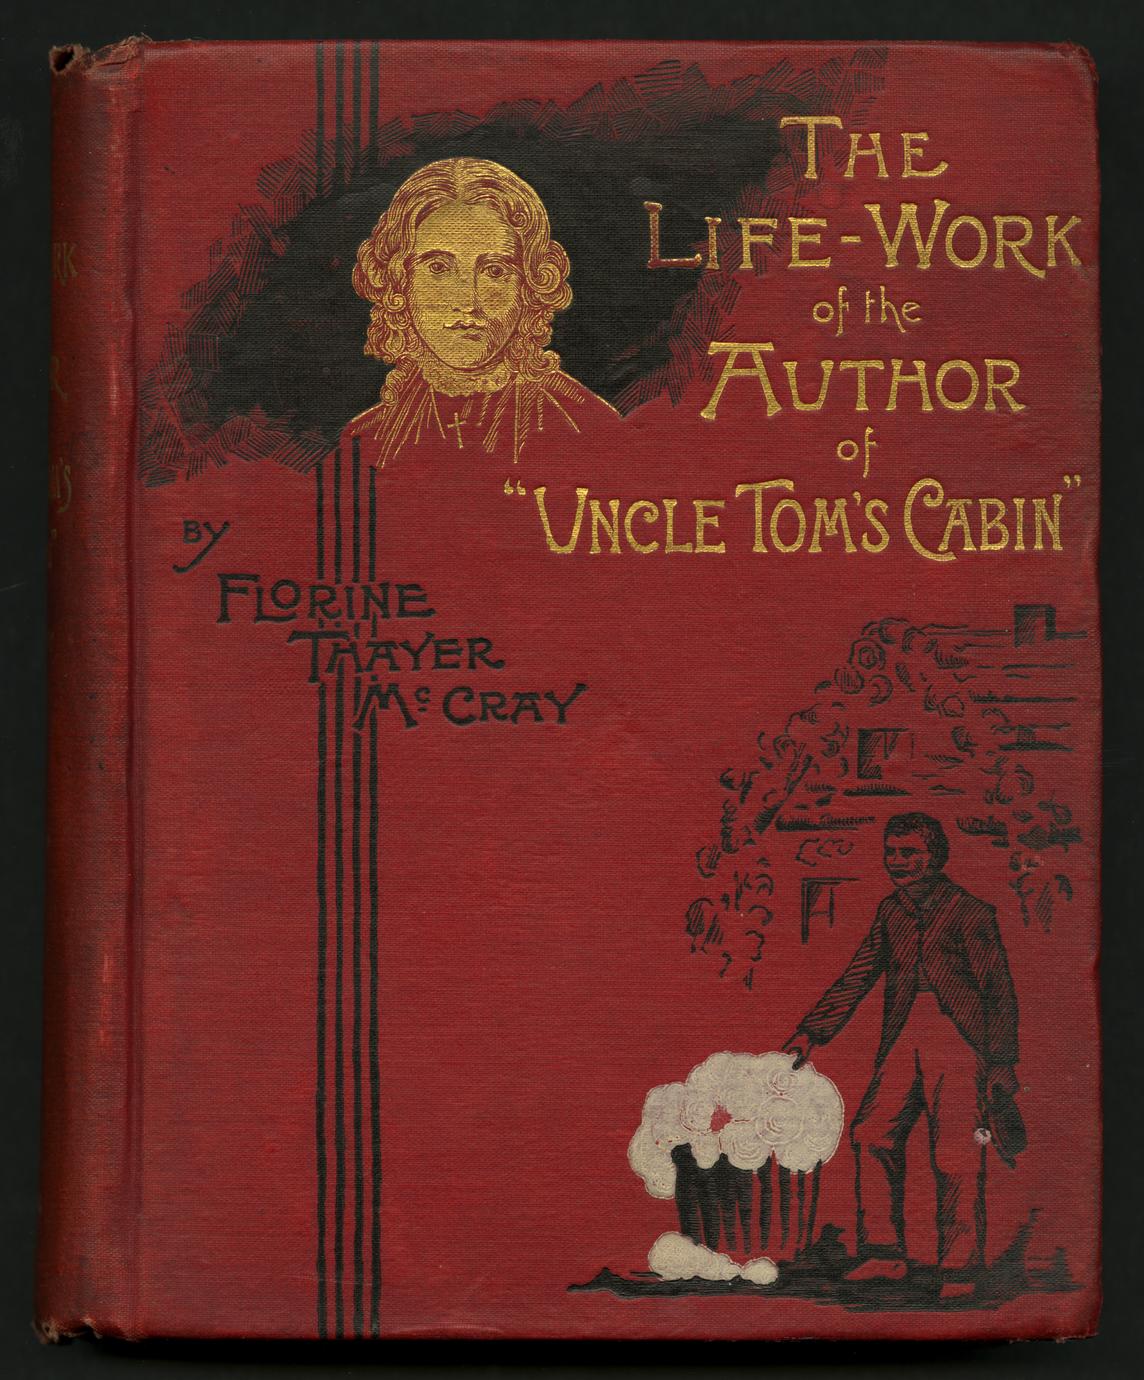 The life-work of the author of Uncle Tom's cabin (1 of 3)